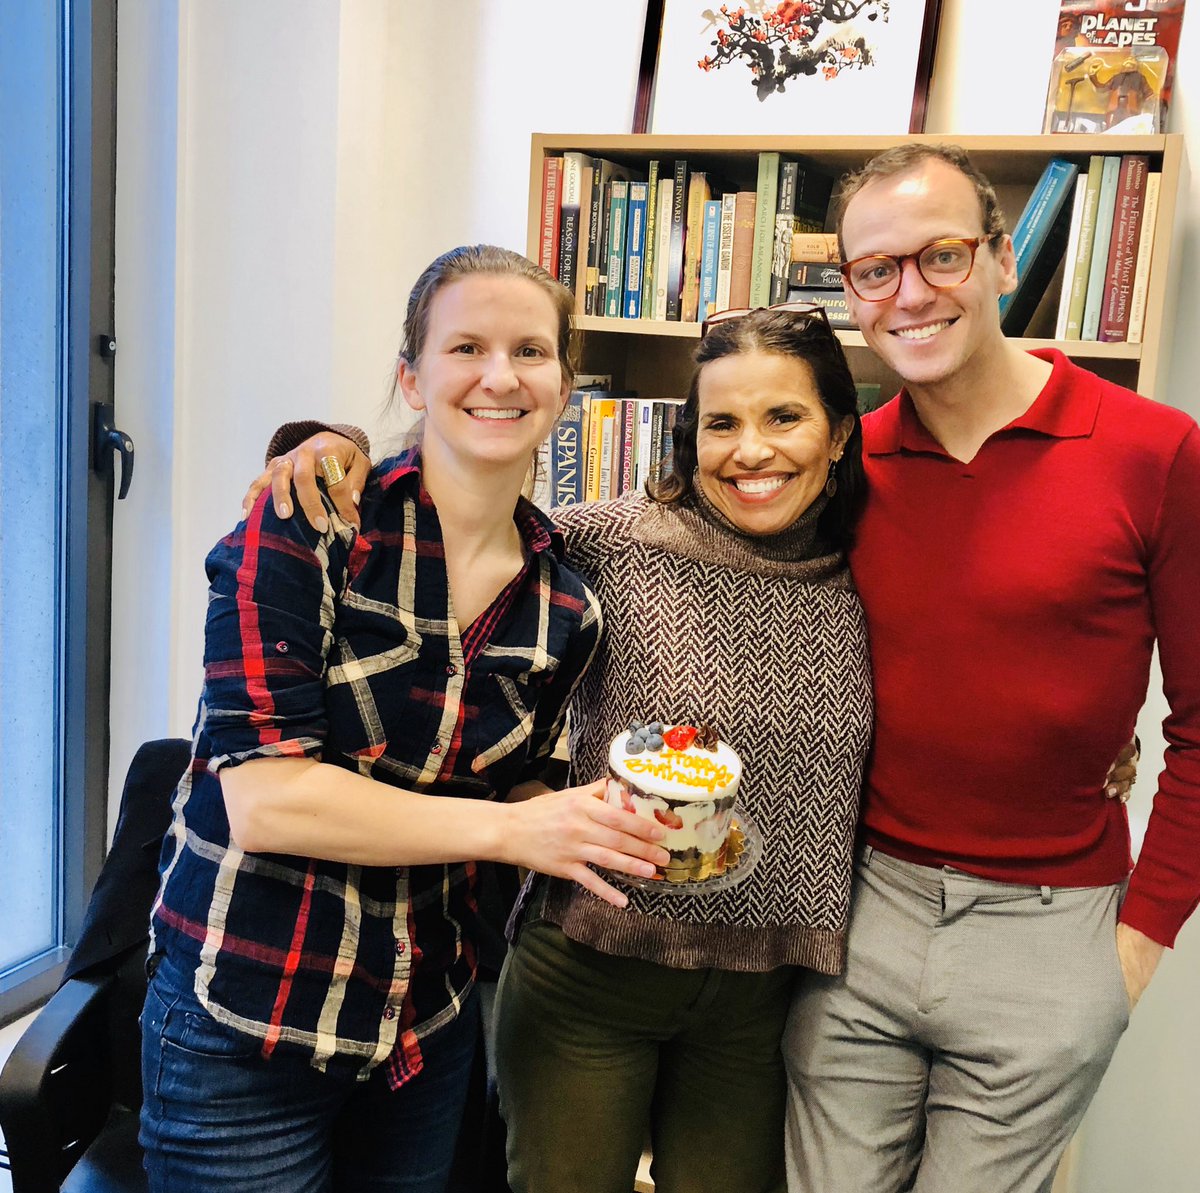 Surprise Lab Birthday Celebration!🎉
Happy Belated Birthday to @ACSneuro & @DrtobeM!! I cherish you both & am so grateful have you both on our team!
🎉
Thanks to @MaralNeuro & @CaraCrook3 for making it happen!
#BirthdayTwins #BetterTogether #GratefulMentor #BetterLateThanNever :)